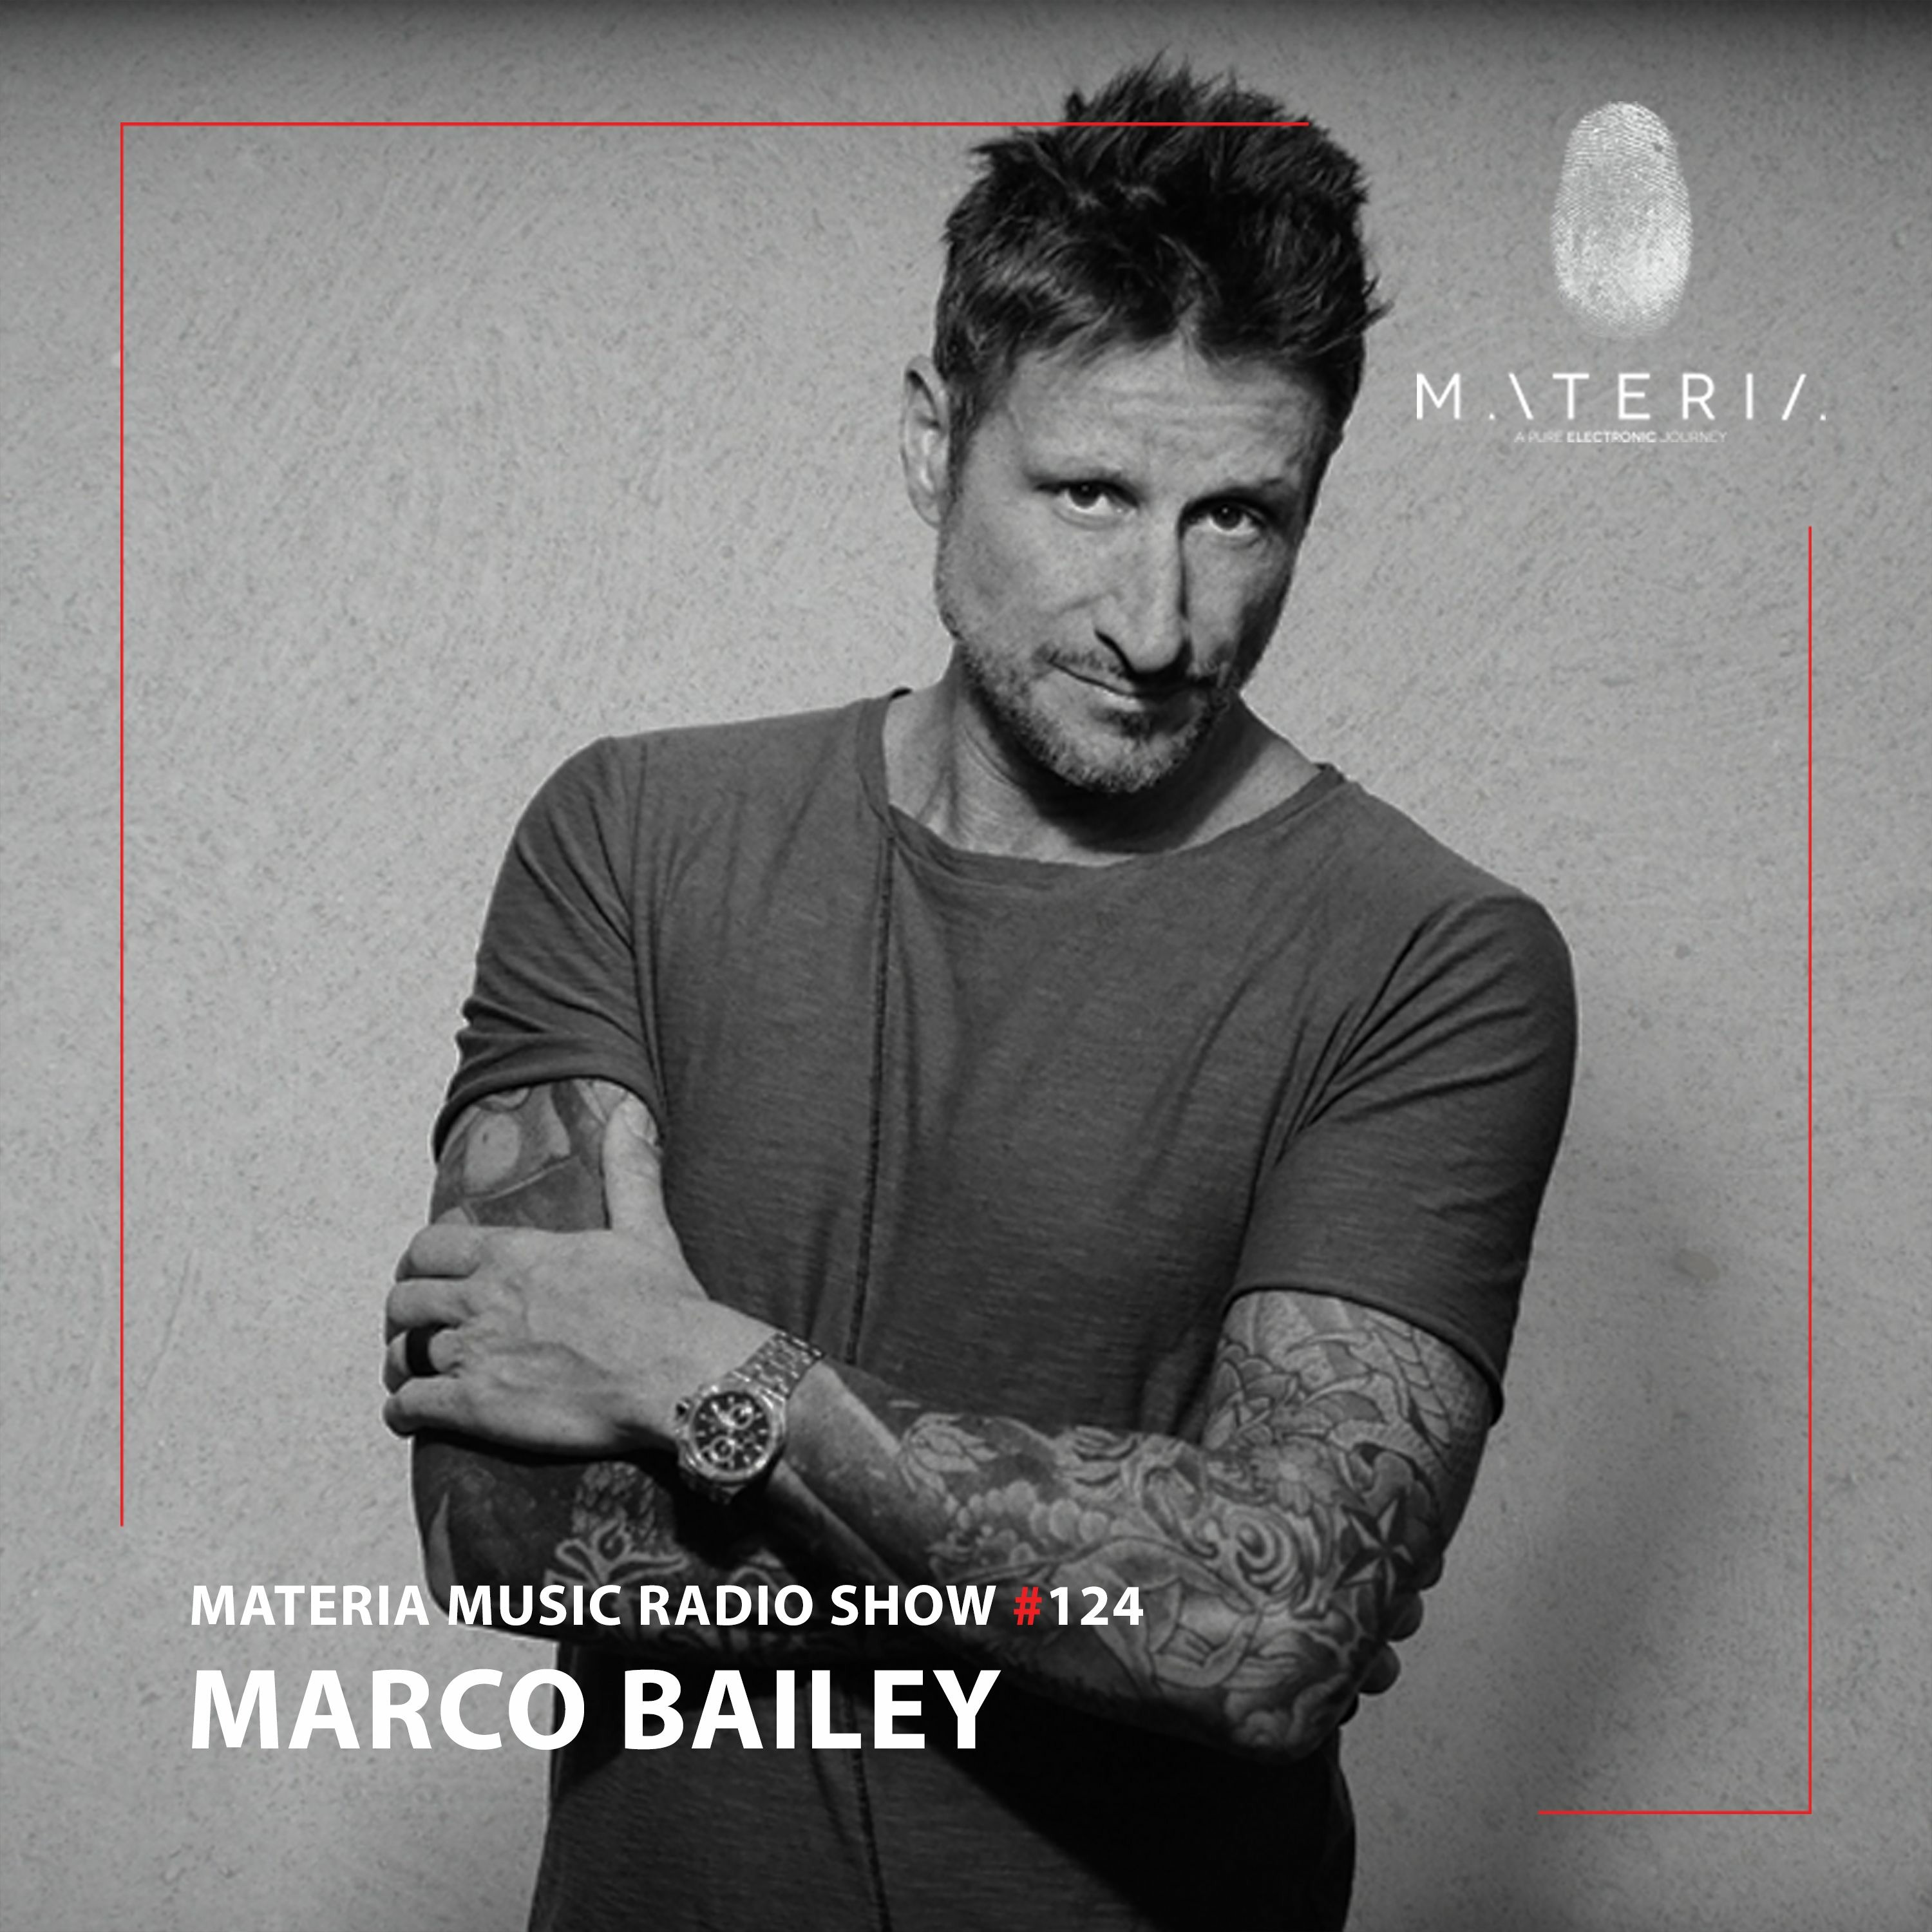 MATERIA Music Radio Show 124 with Marco Bailey